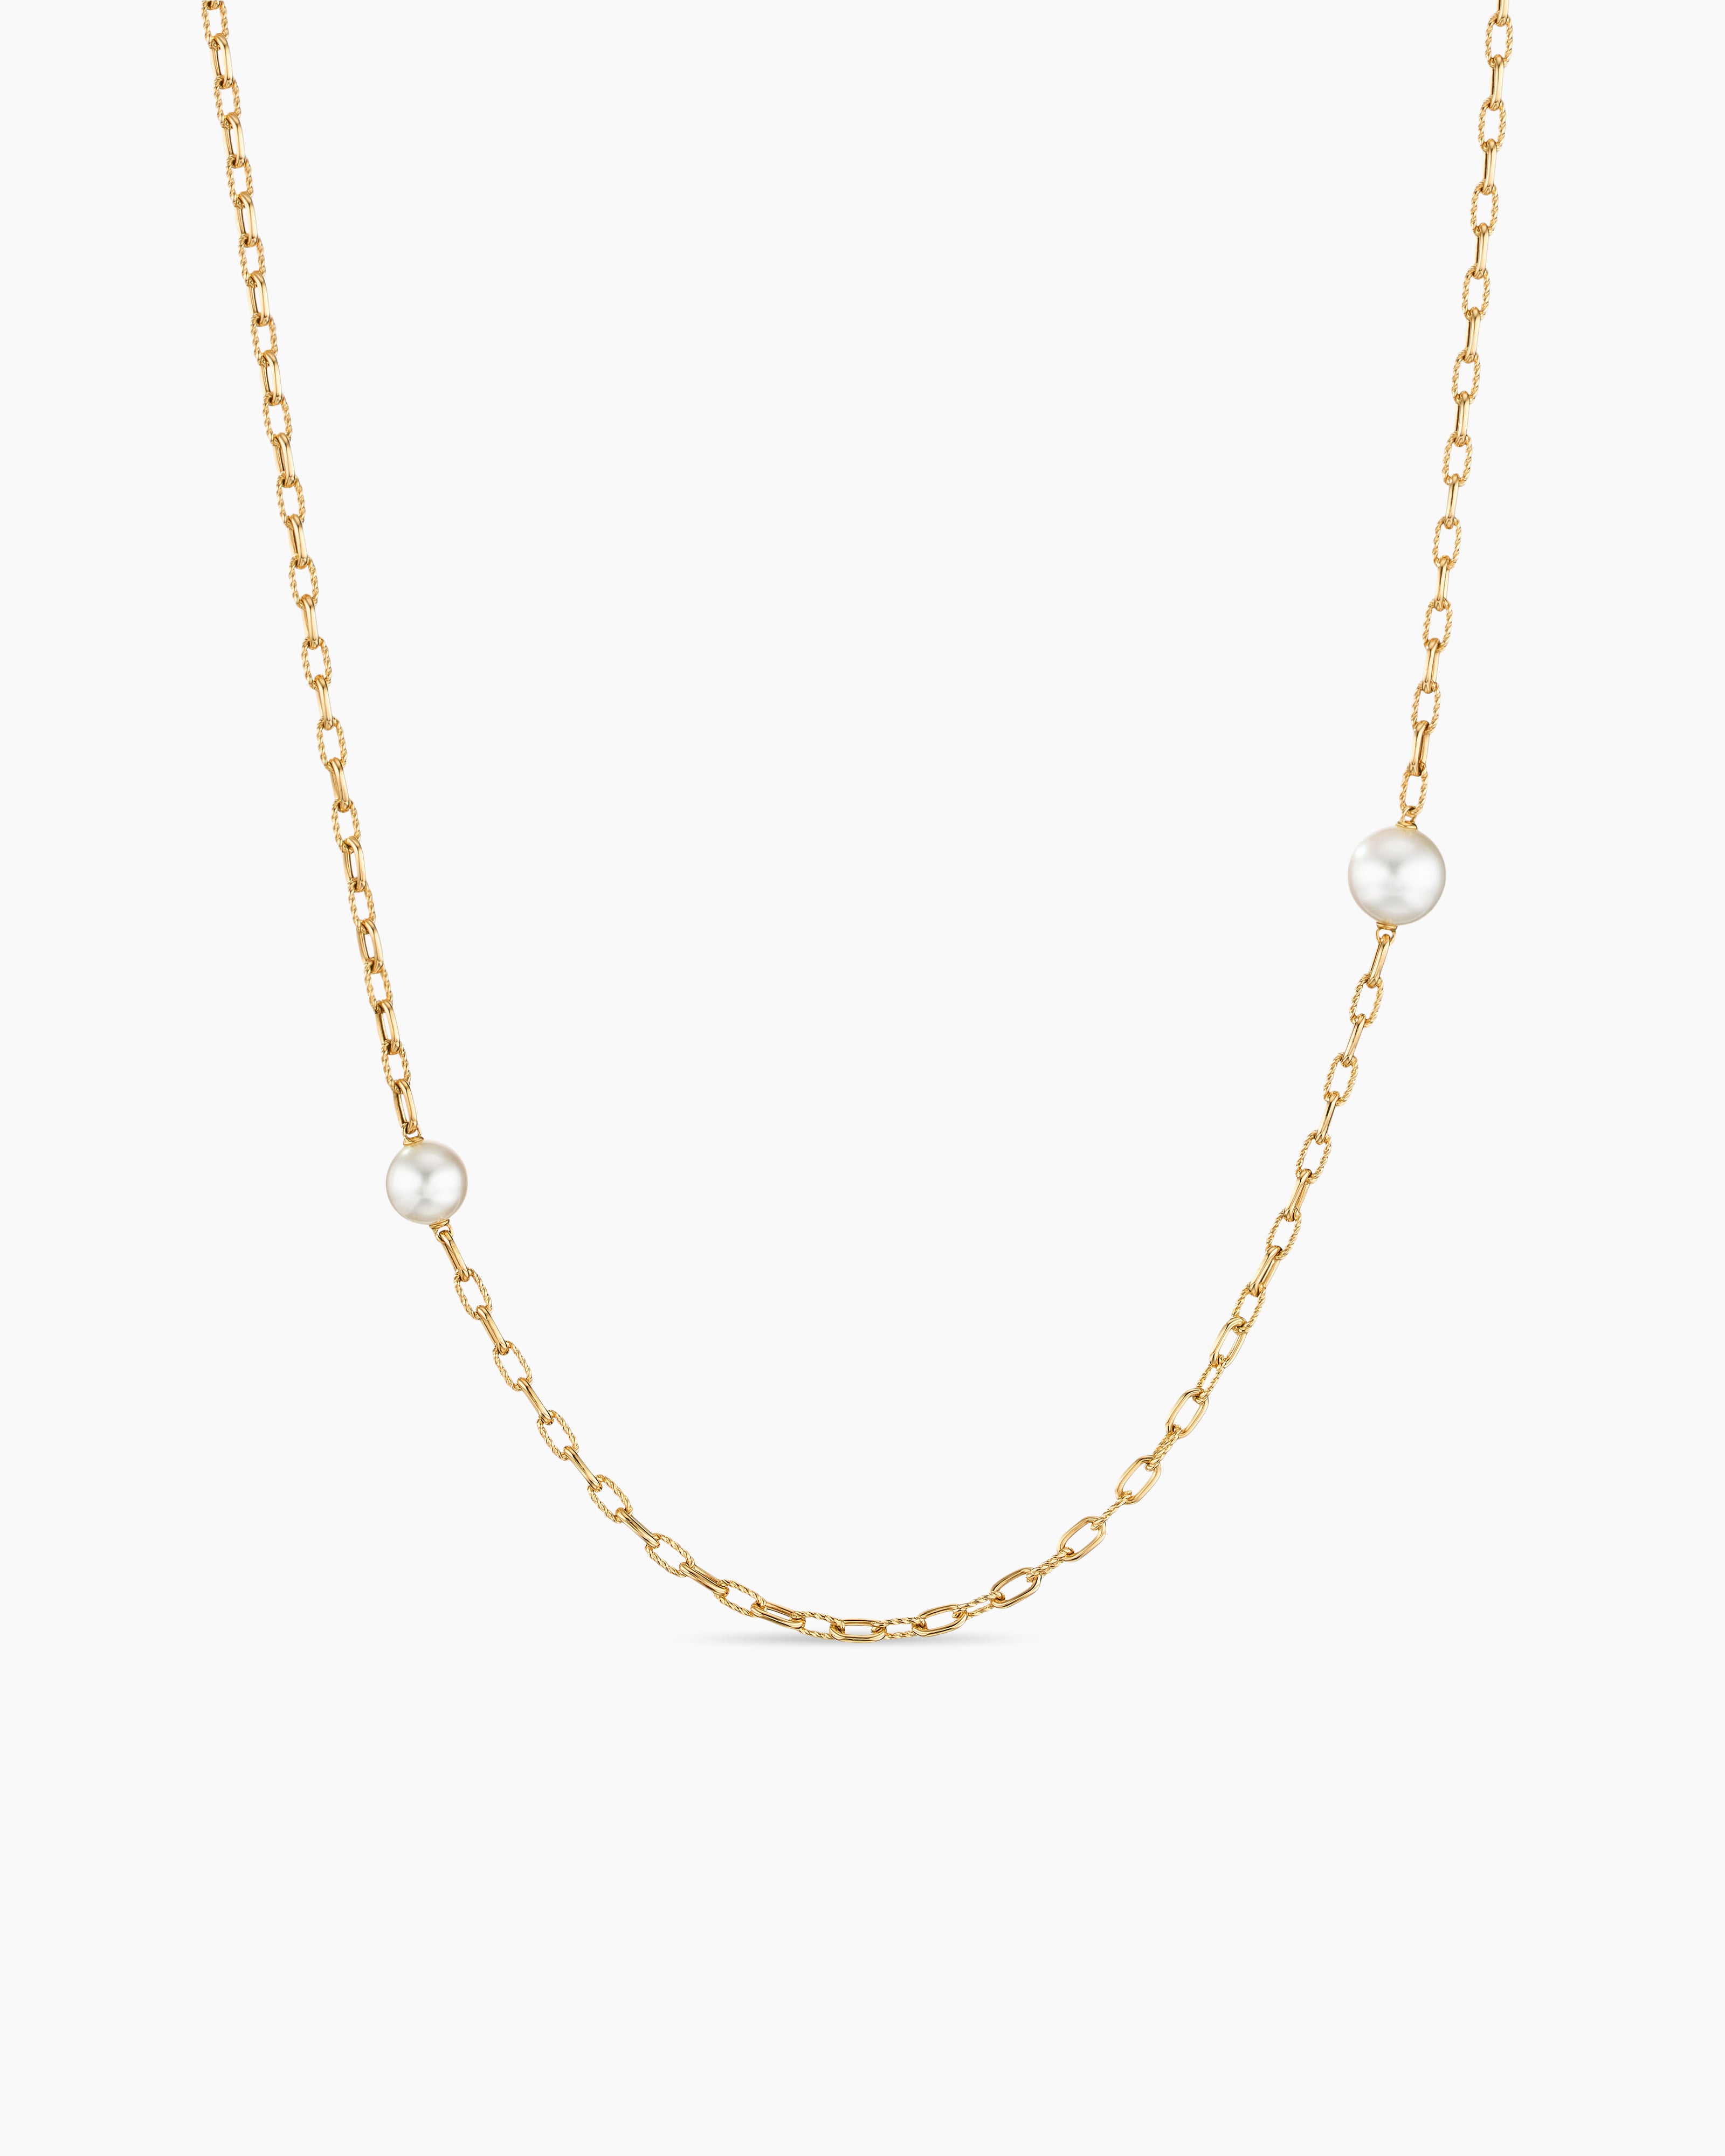 David Yurman DY Madison Toggle Chain Necklace with 18K Yellow Gold, 20